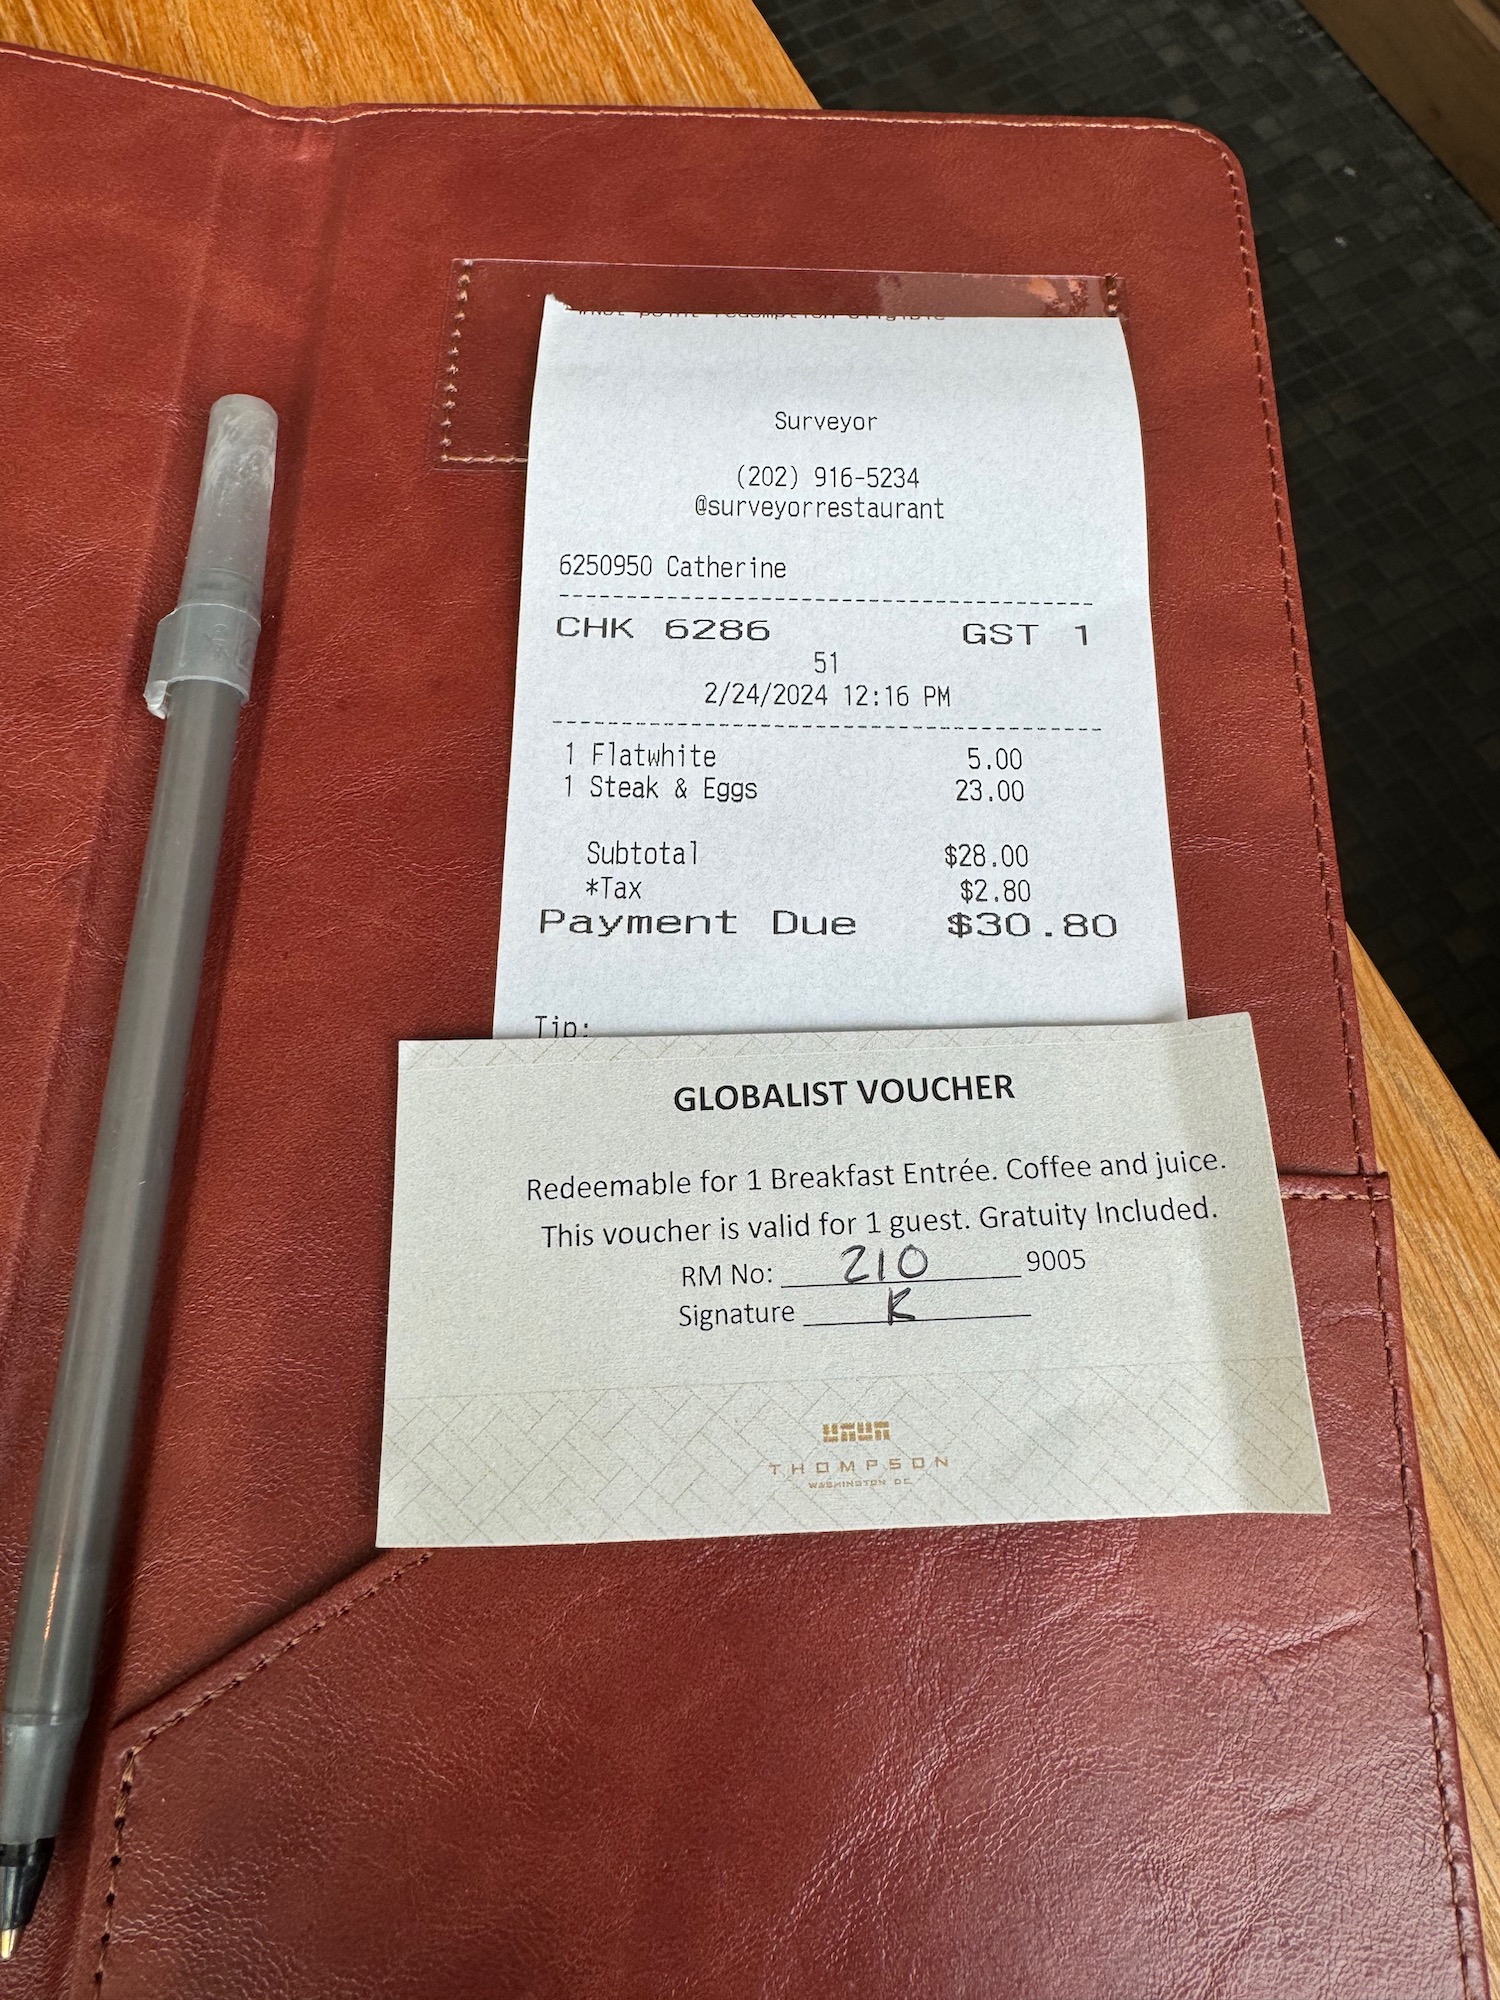 a receipt and a pen on a red leather cover